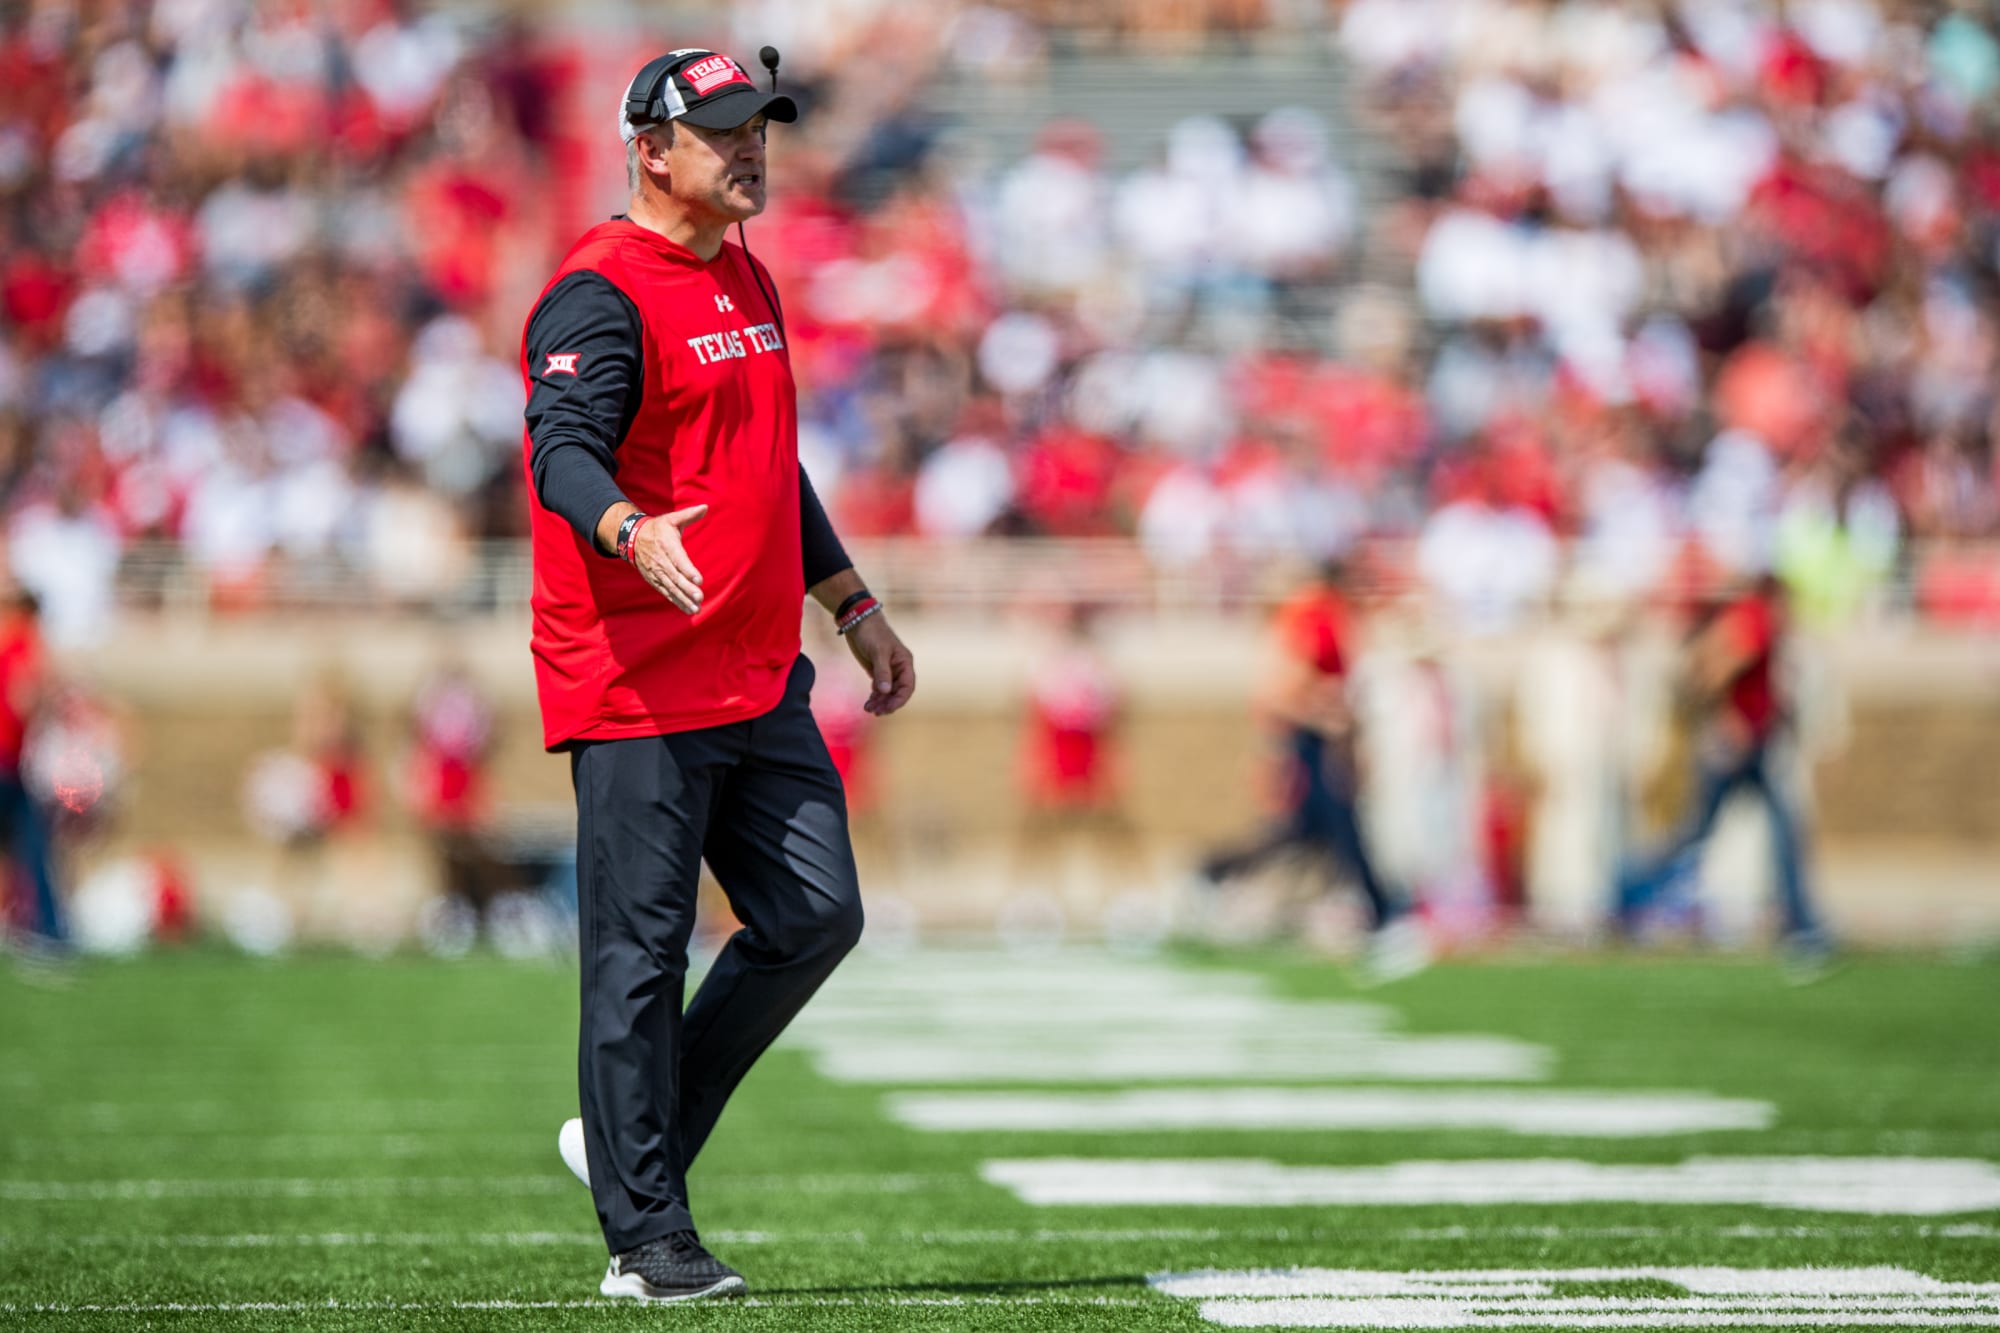 Texas Tech football: Joey McGuire sells 'The Brand' with win over Houston